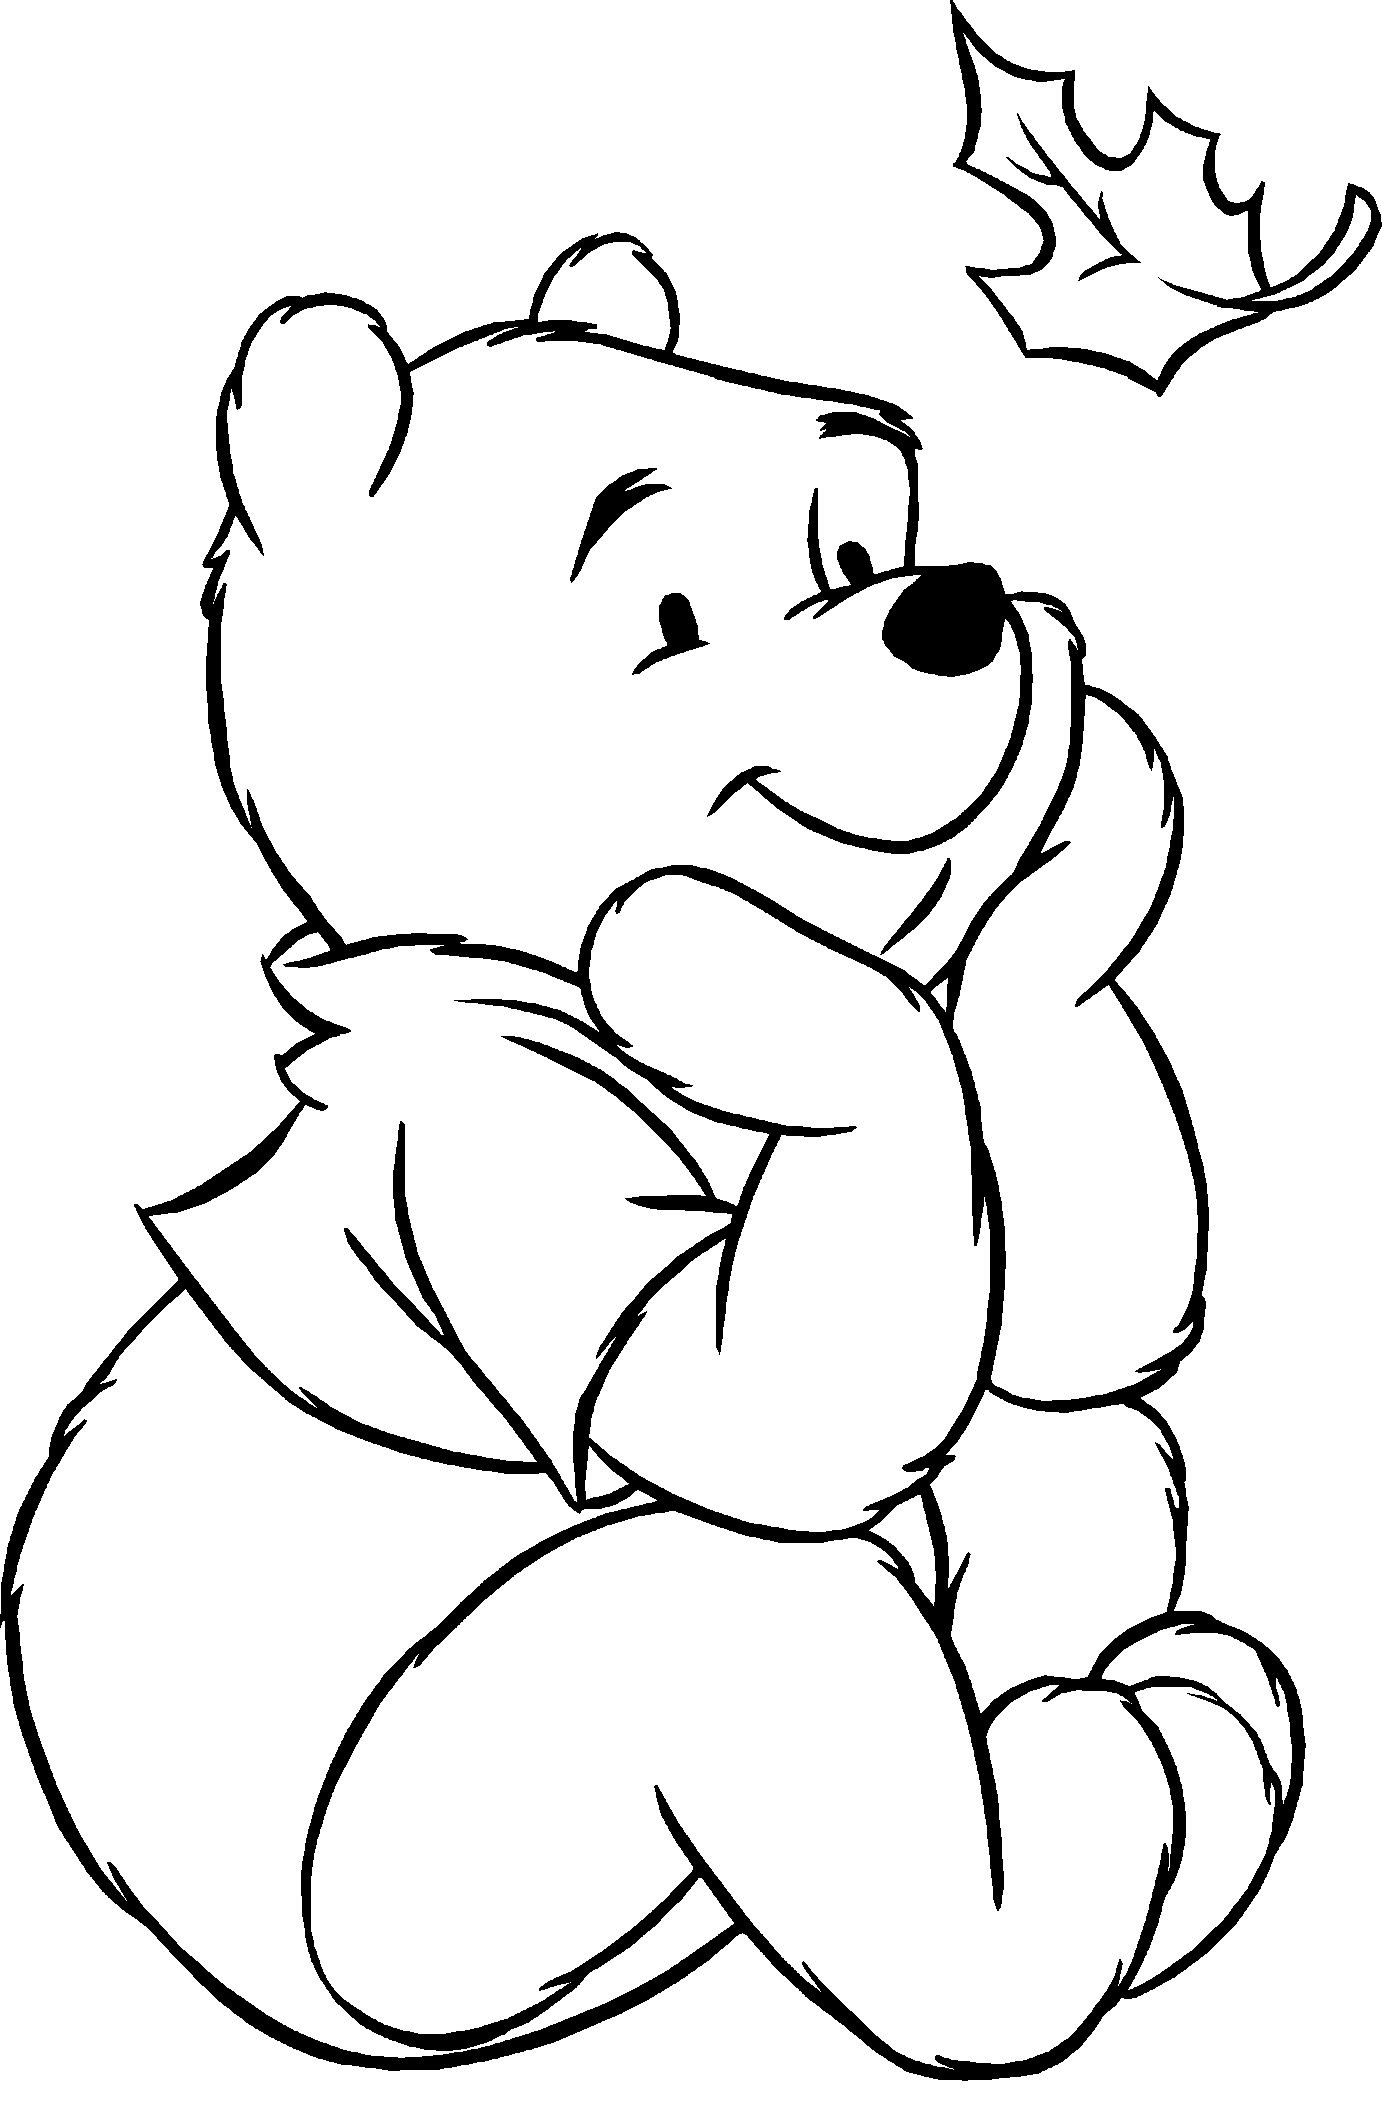 Disney Coloring Pages For Boys
 Disney Coloring Pages For Boys